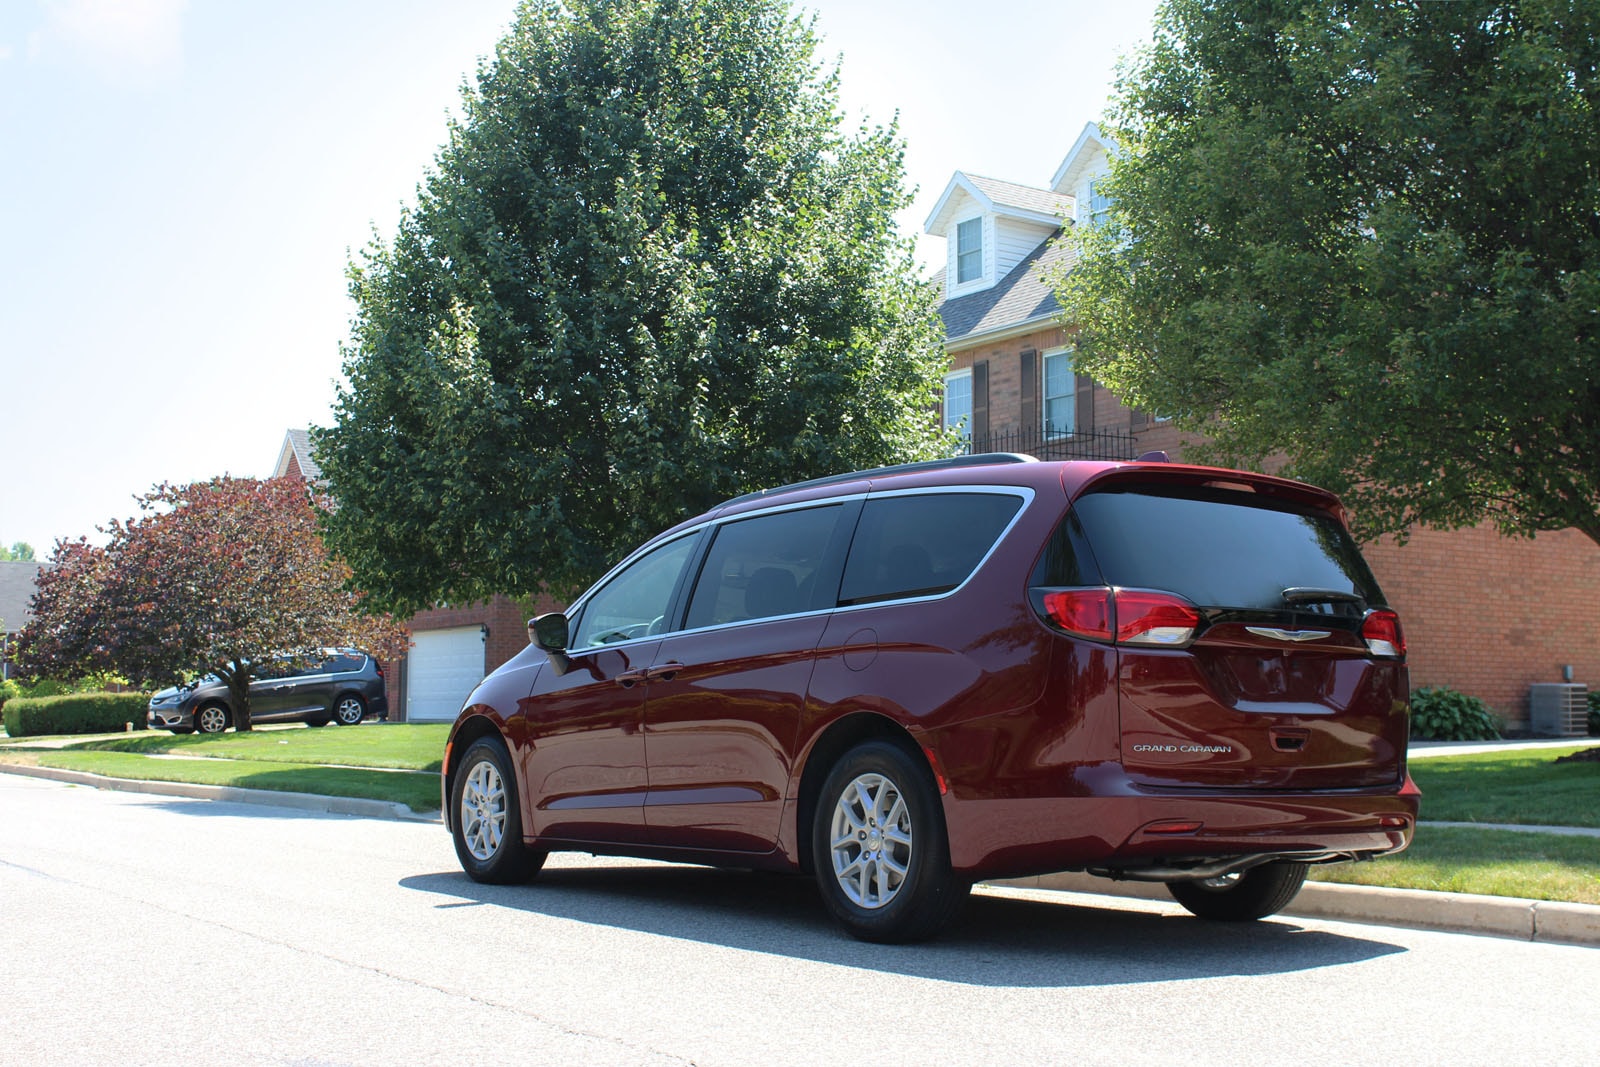 2021 Chrysler “Grand Caravan” Is Actually the Voyager with